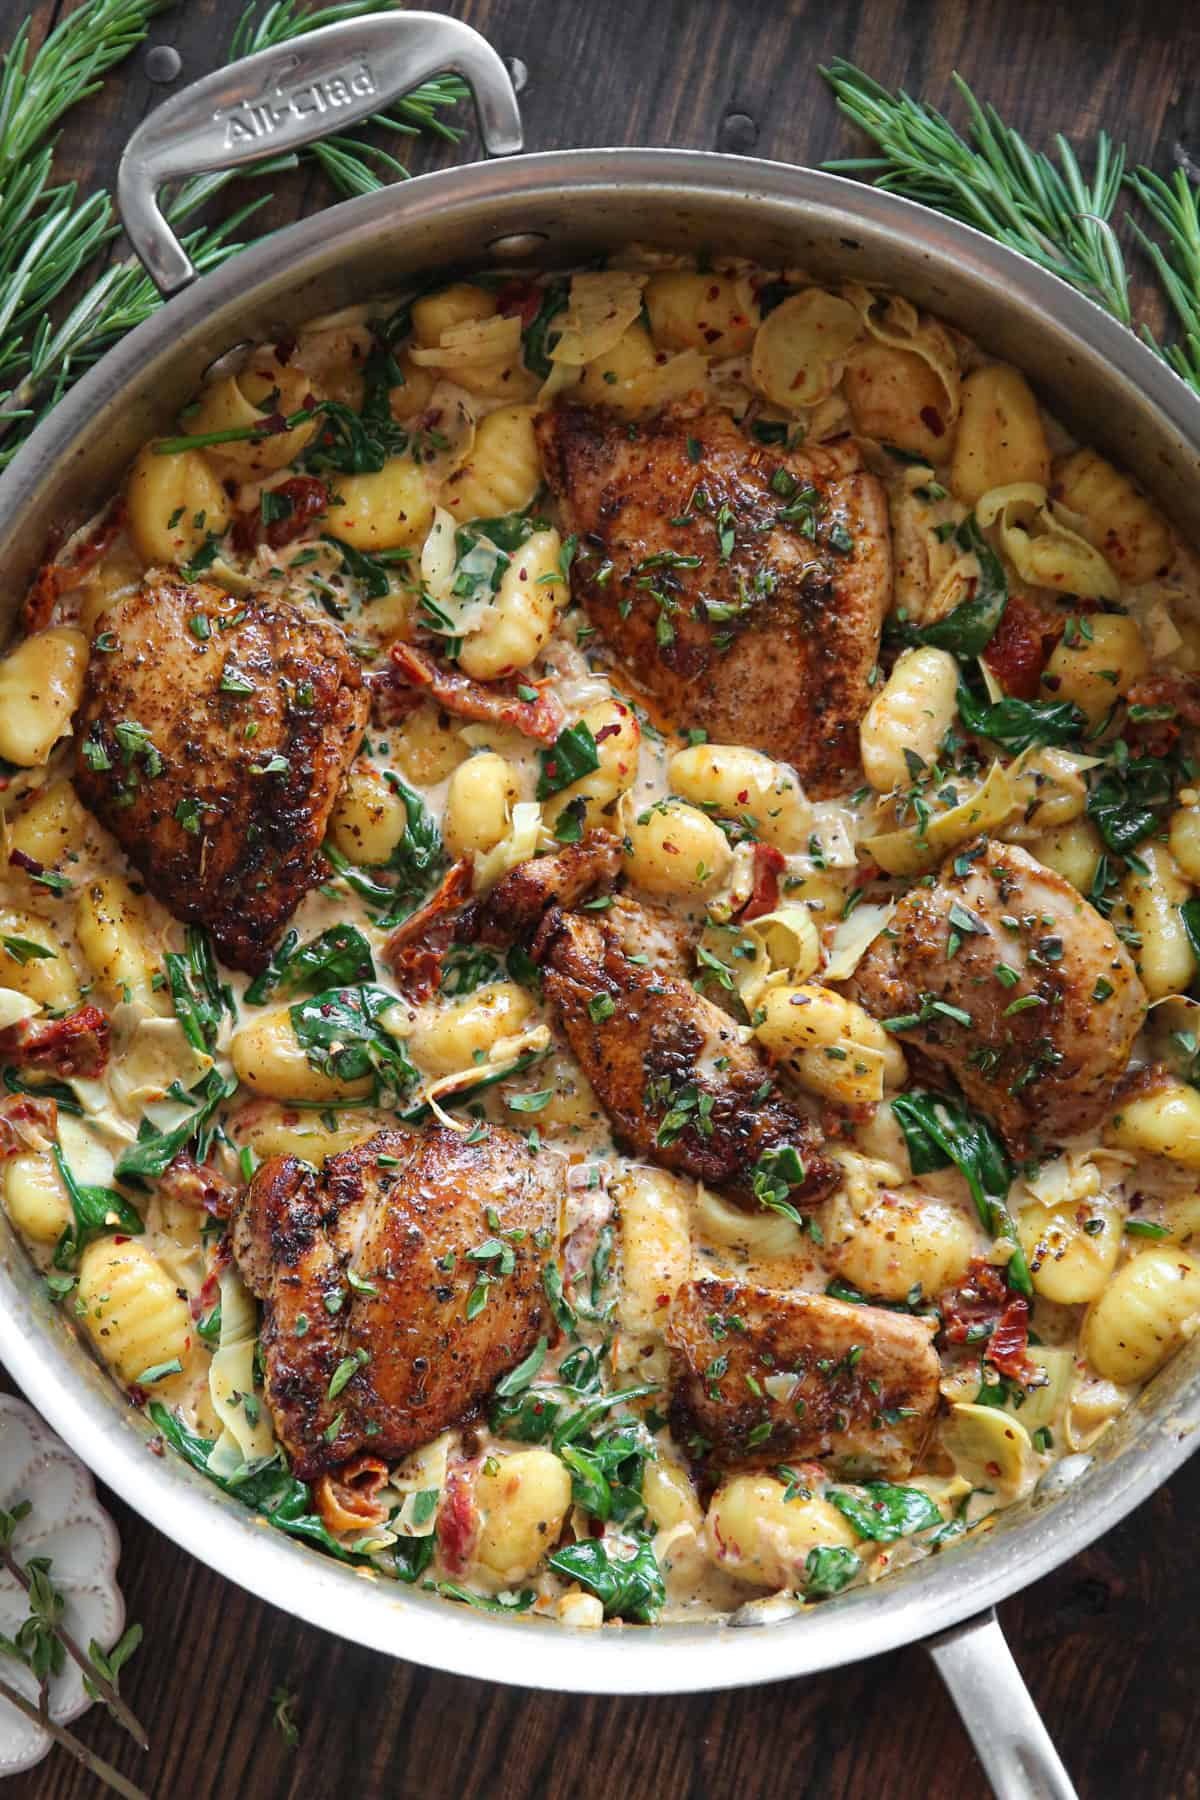 Creamy Chicken and Gnocchi with Sun-Dried Tomatoes, Spinach, and Artichokes - in a stainless steel pan.